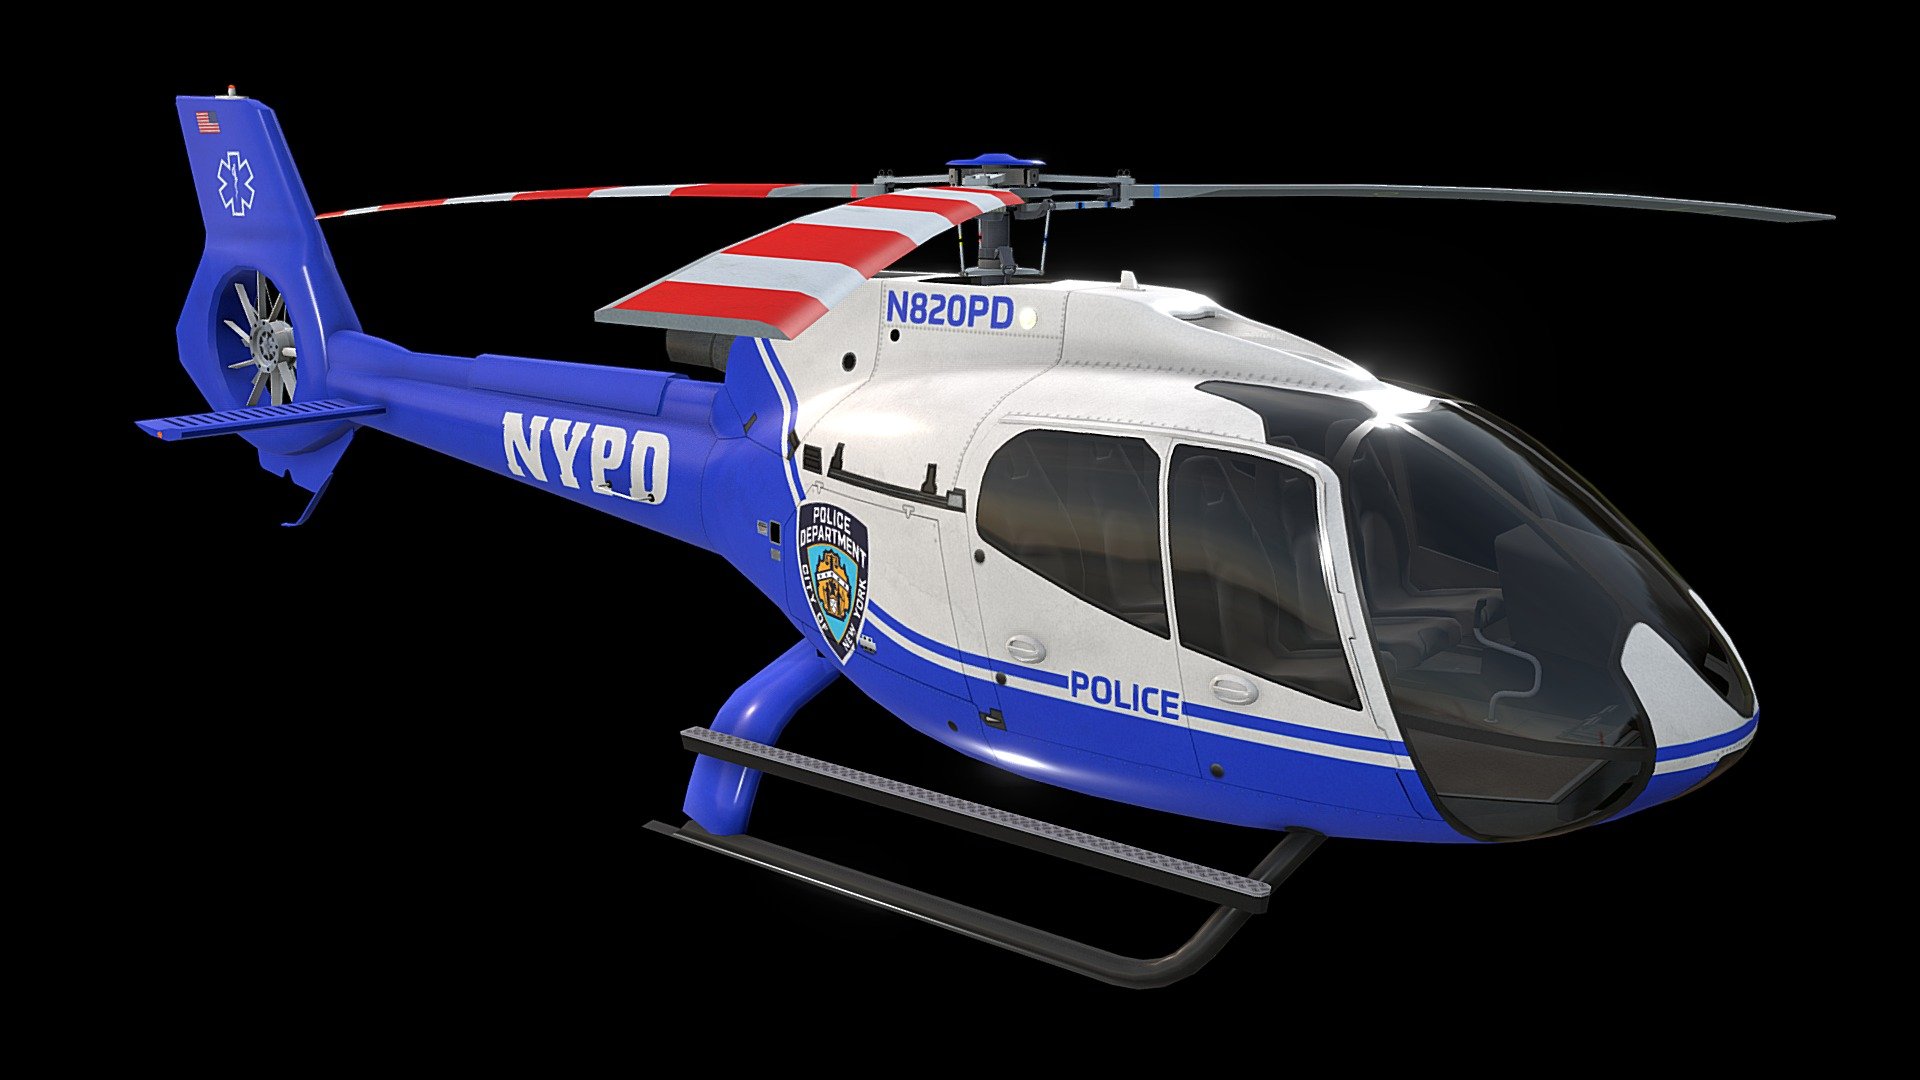 Low poly helicopter with 4 preconfigured level of detail

Made using blueprints in real world scale meters

LOD0 is the HQ version of the asset with bended top rotor and tiny parts

All other LOD are made unsolicited and voluntarily

LOD0 19710 tris, LOD1 10462 tris, LOD2 7388 tris, LOD3 5990 tris

All meshes are clean and 100% human controlled triangulated

Properly placed rotors pivots for flawless rotations

Simple capsule built interior that however fits perfectly the body

Non-overlapping unwrapped with best mapping for brandings

Both PBR workflows ready native 4K textures

Decreasing physical resolution to 2K results in a still decent looking heli

All liveries within the Airbus H130 series are interchangeable

For this purpose change just the 3 x albedo maps for body, rotors, interior

All LOD are exported seperately and together in each file format

Included are multiple file formats and native textures for download
 - NYPD Helicopter Airbus H130 Livery 14 - Buy Royalty Free 3D model by RealtimeModels 3d model